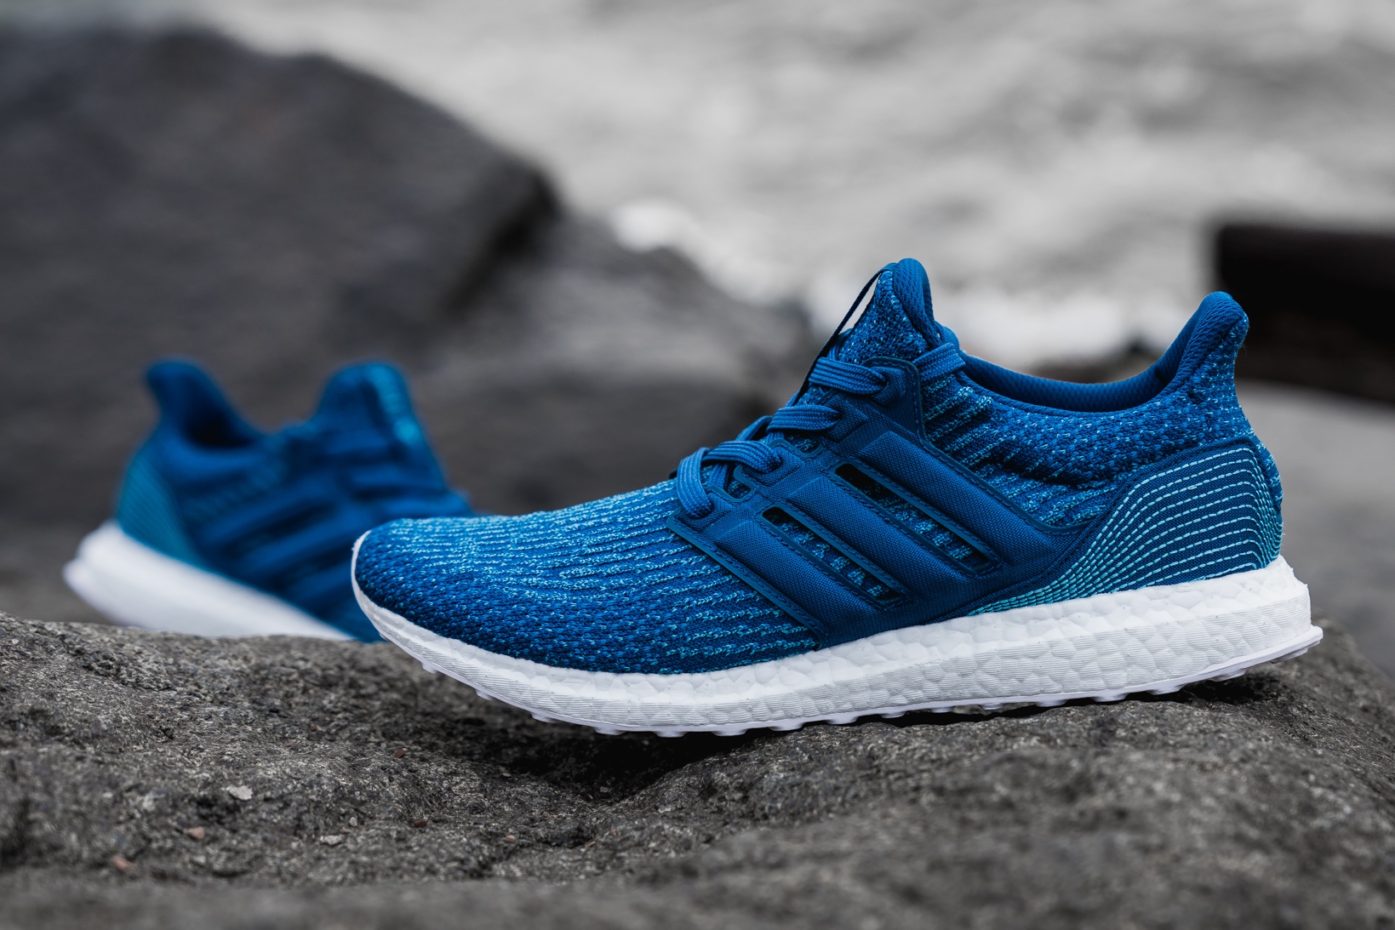 Parley x adidas UltraBOOST 3.0 - A Closer Look - Trapped Magazine